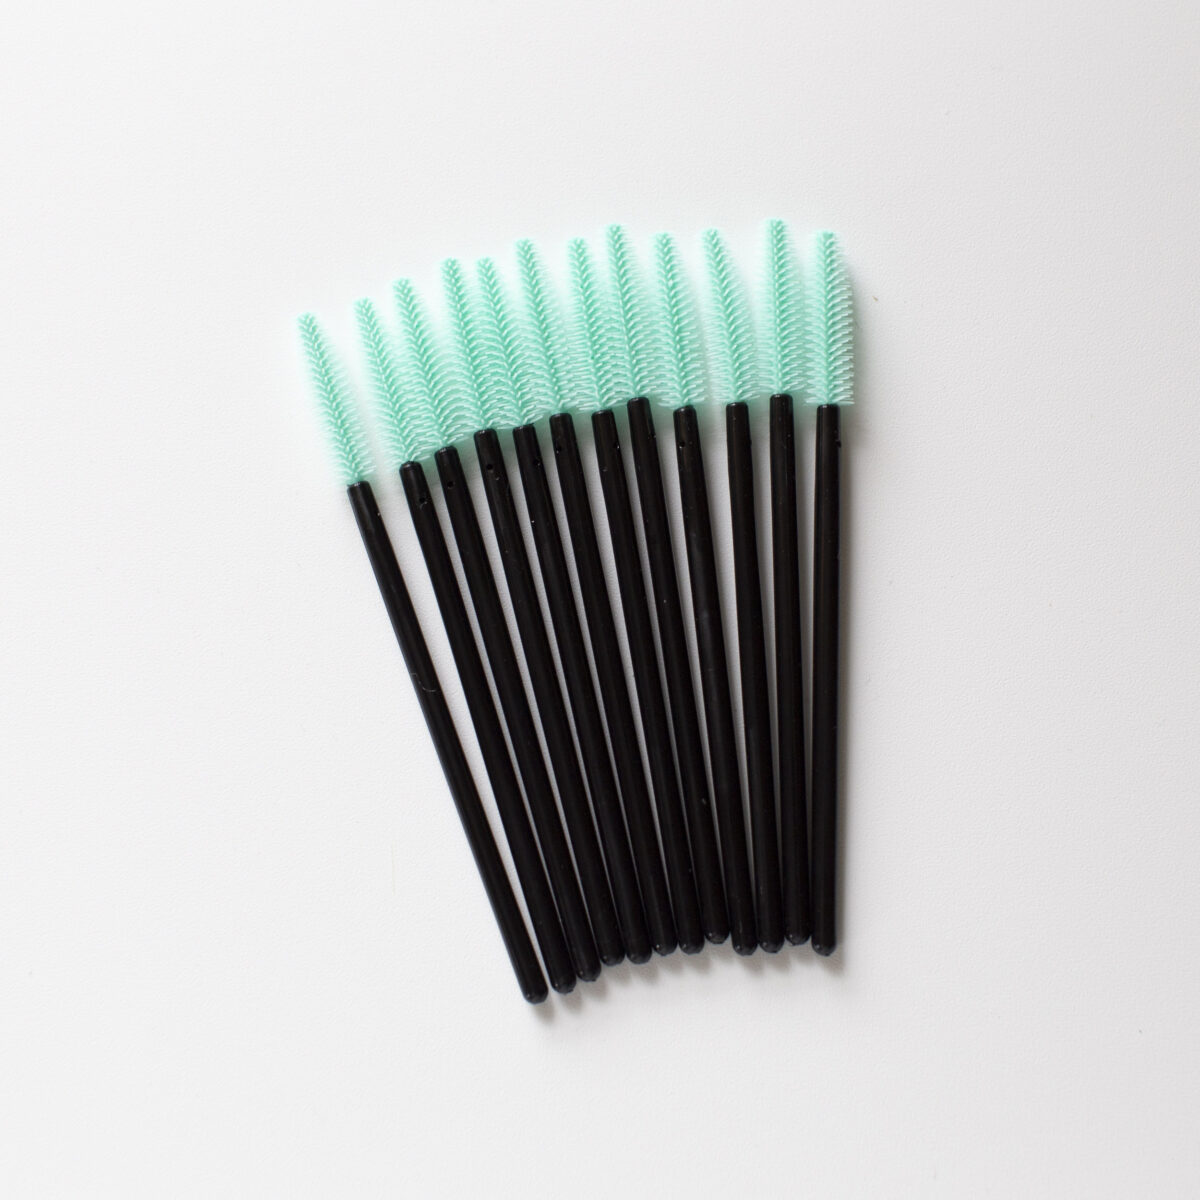 Silicon Disposable Mascara Brushes (Pack of 50)